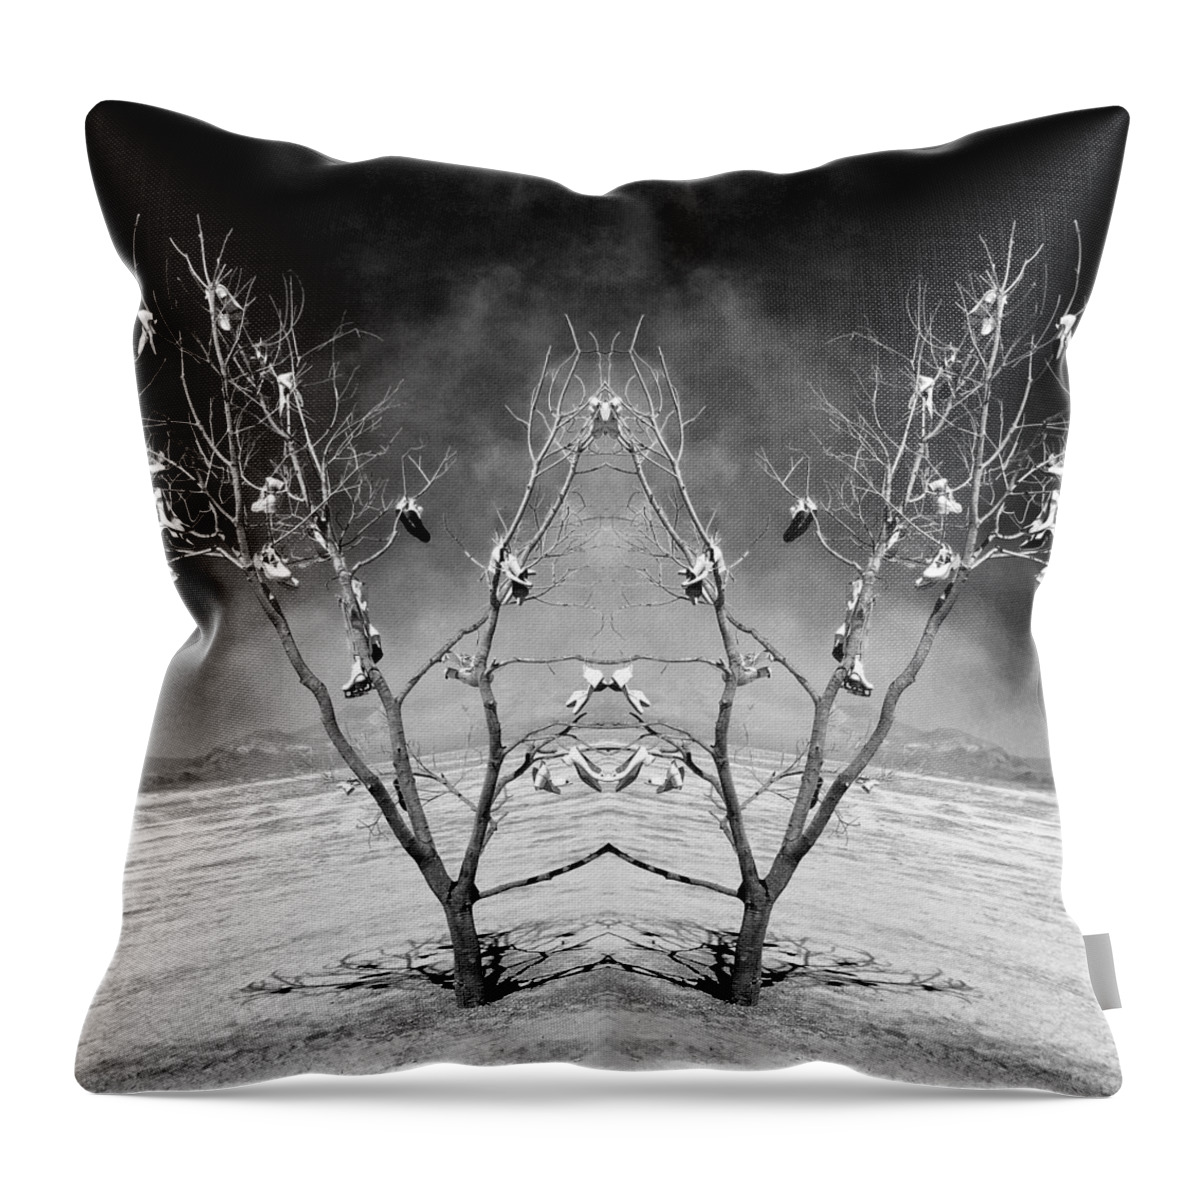 Lost Soles Throw Pillow featuring the photograph Lost Soles by Dominic Piperata